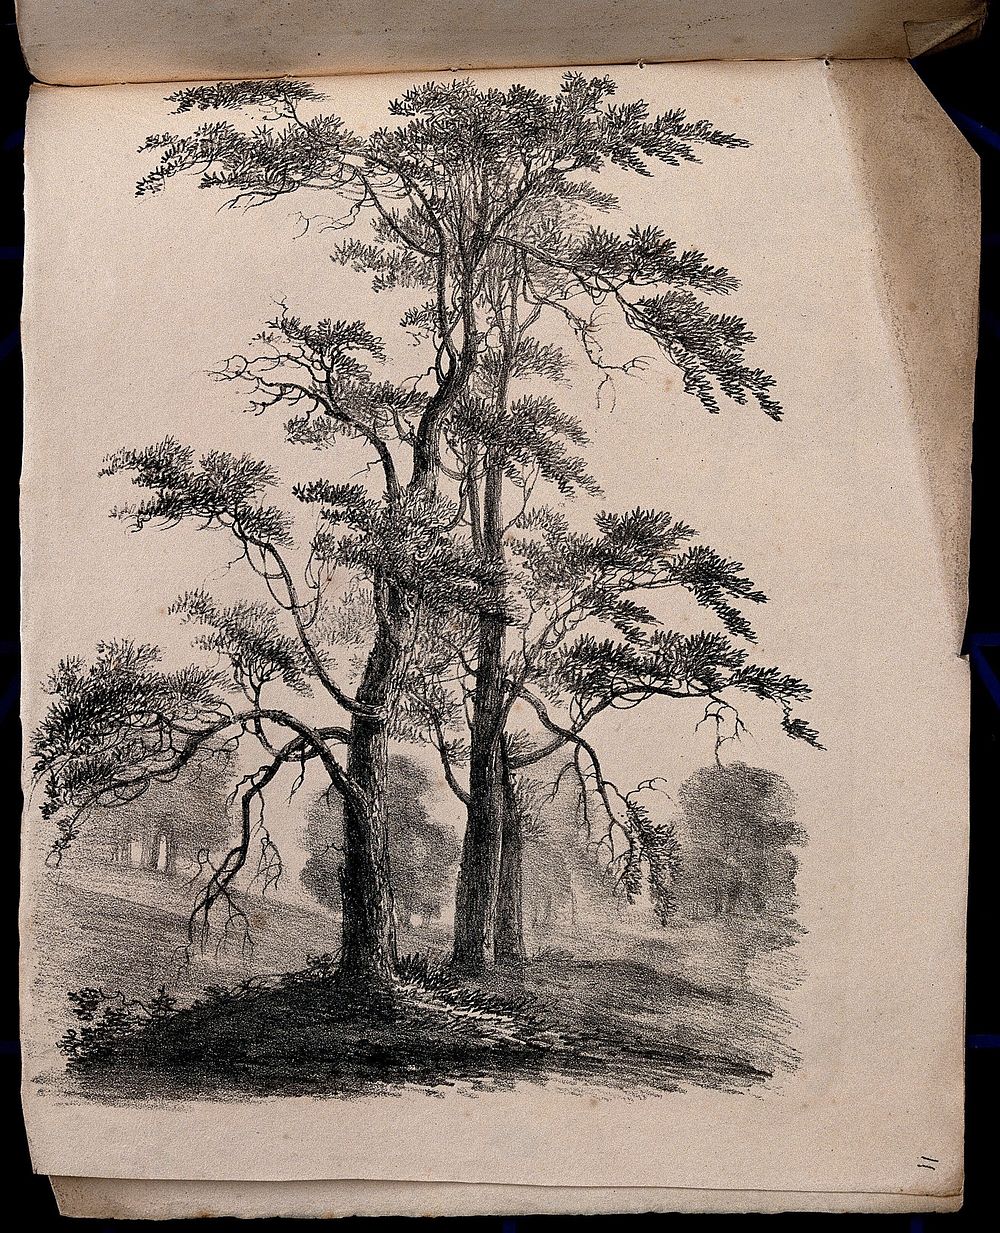 Three trees, possibly pines (Pinus species), with surrounding vegetation. Lithograph, c. 1822.